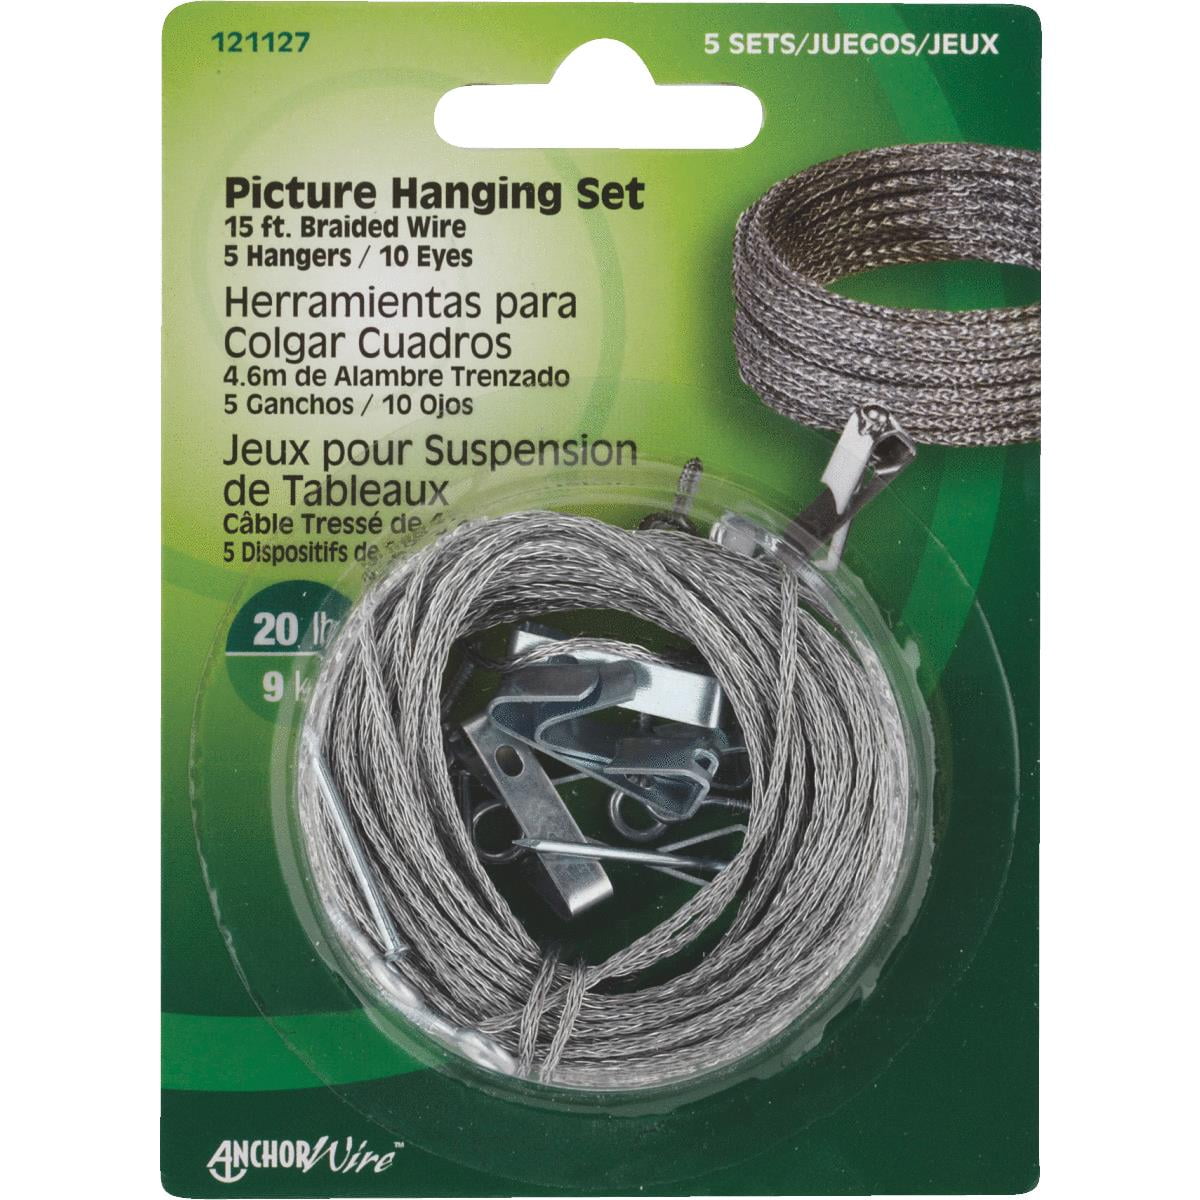 2 Sets 122204 new sealed Details about   HILLMAN Anchor Wire Heavy-Duty Picture Hanging Set